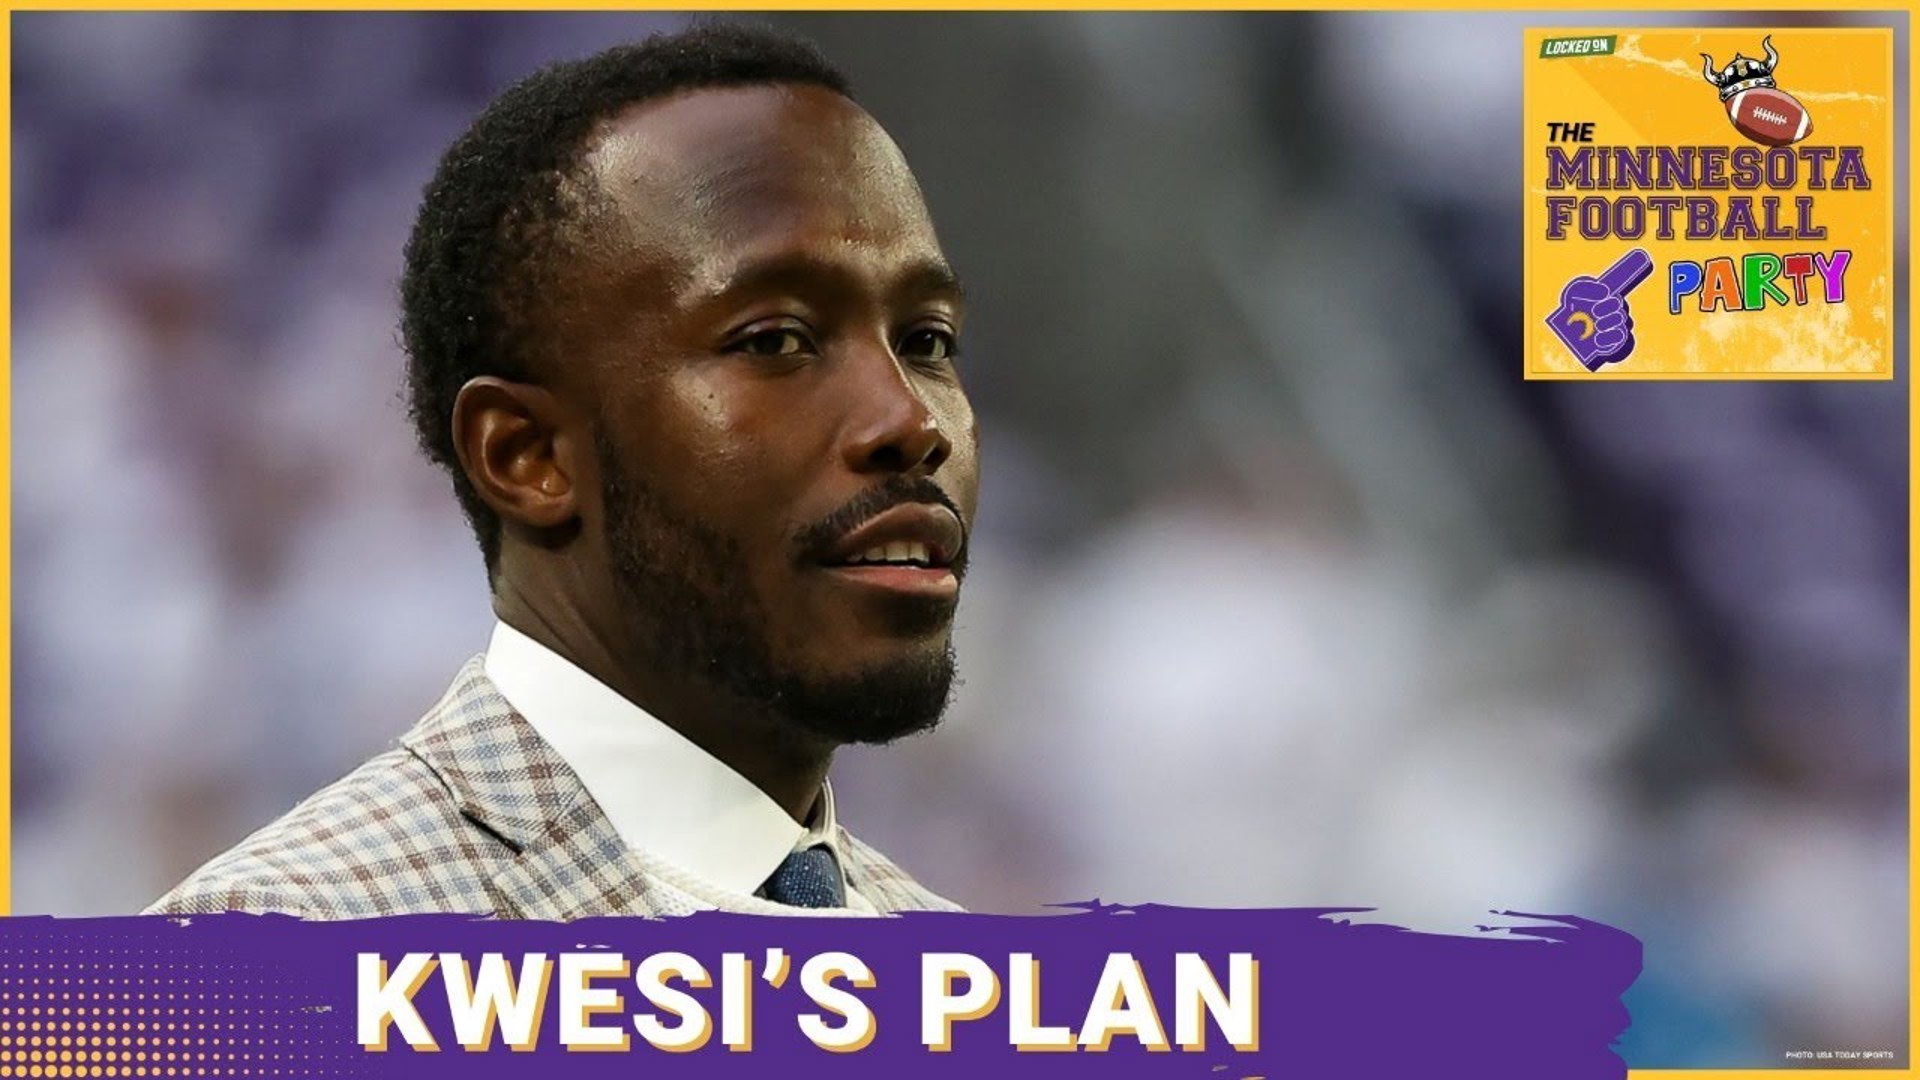 Kwesi Adofo-Mensah's Plan For the Minnesota Vikings Has Come Into Focus - The MN Football Party